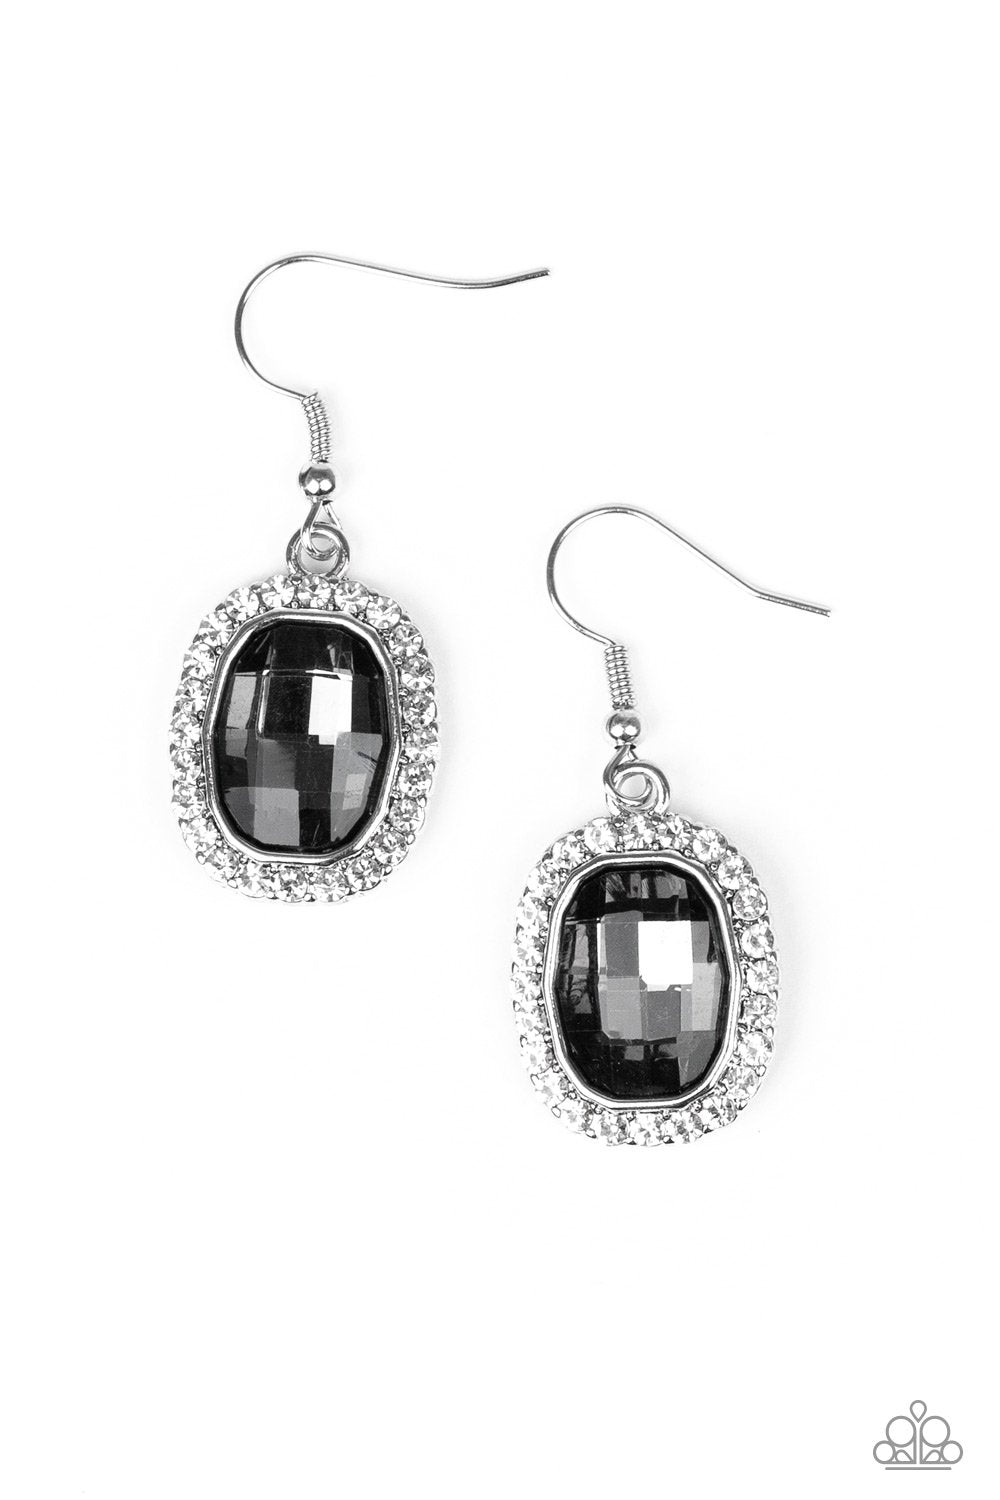 The Modern Monroe Smoky Silver and White Rhinestone Earrings - Paparazzi Accessories-CarasShop.com - $5 Jewelry by Cara Jewels